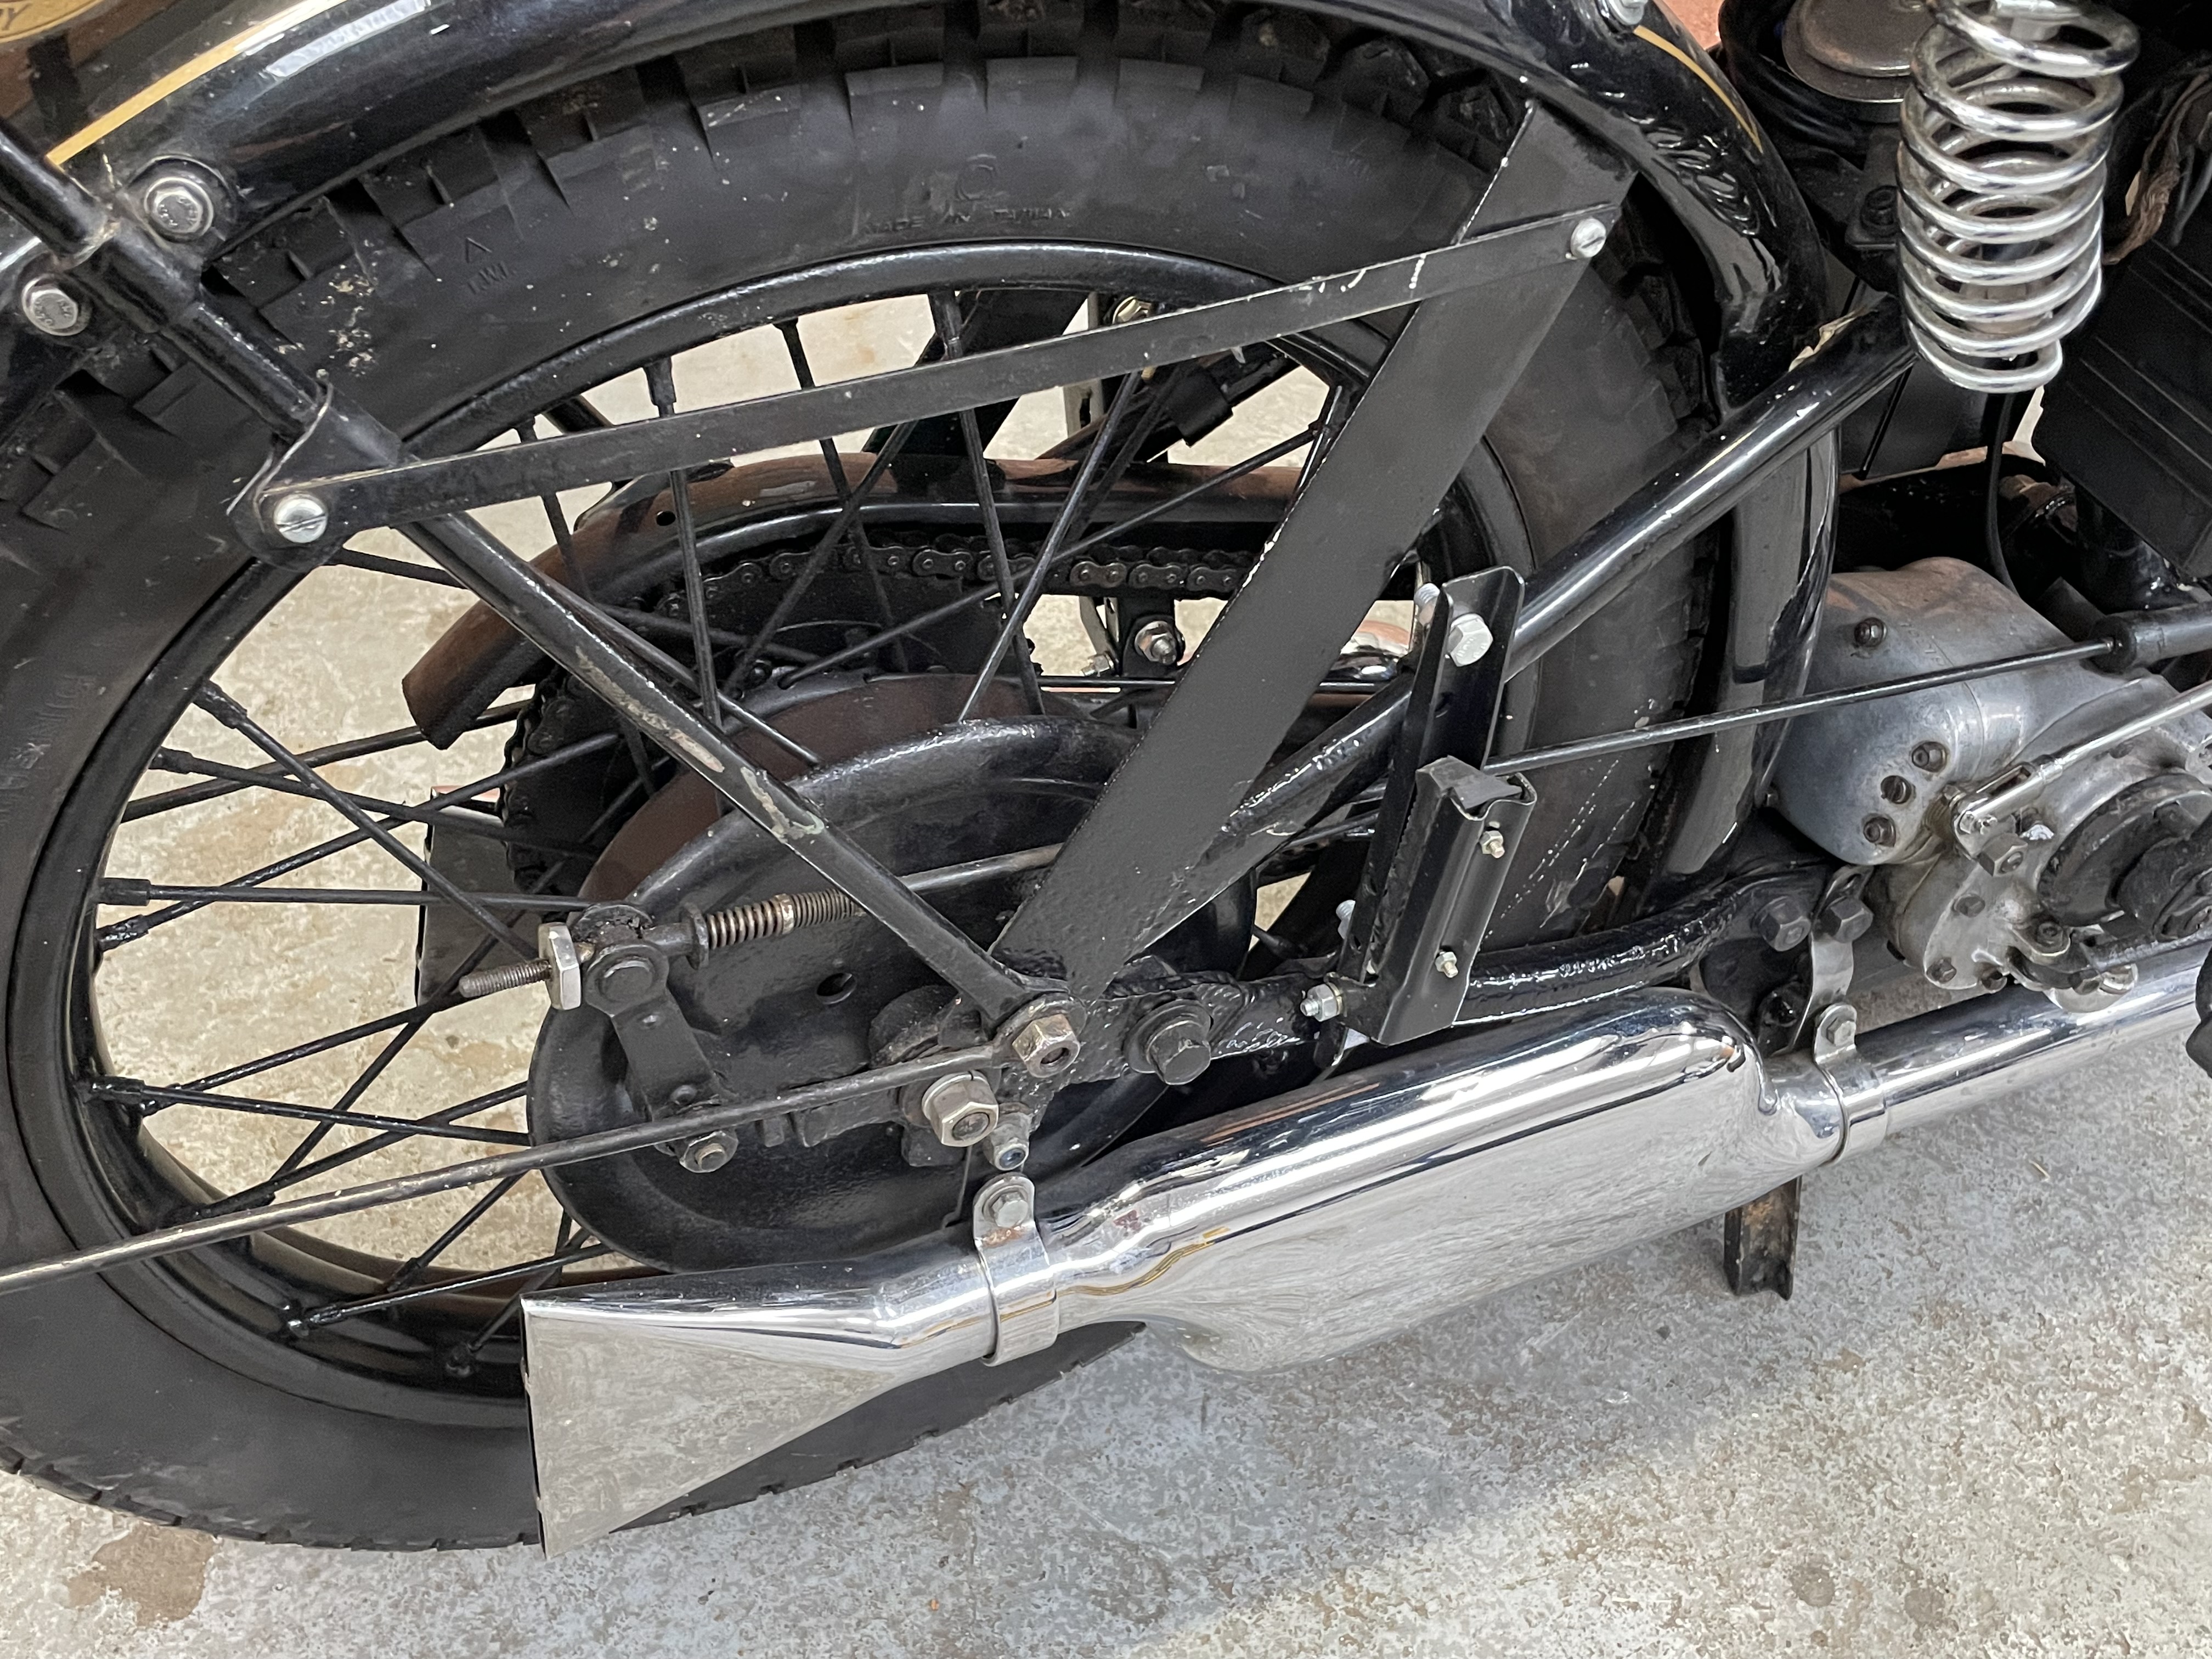 1929 Rudge-Whitworth Special - Image 7 of 12